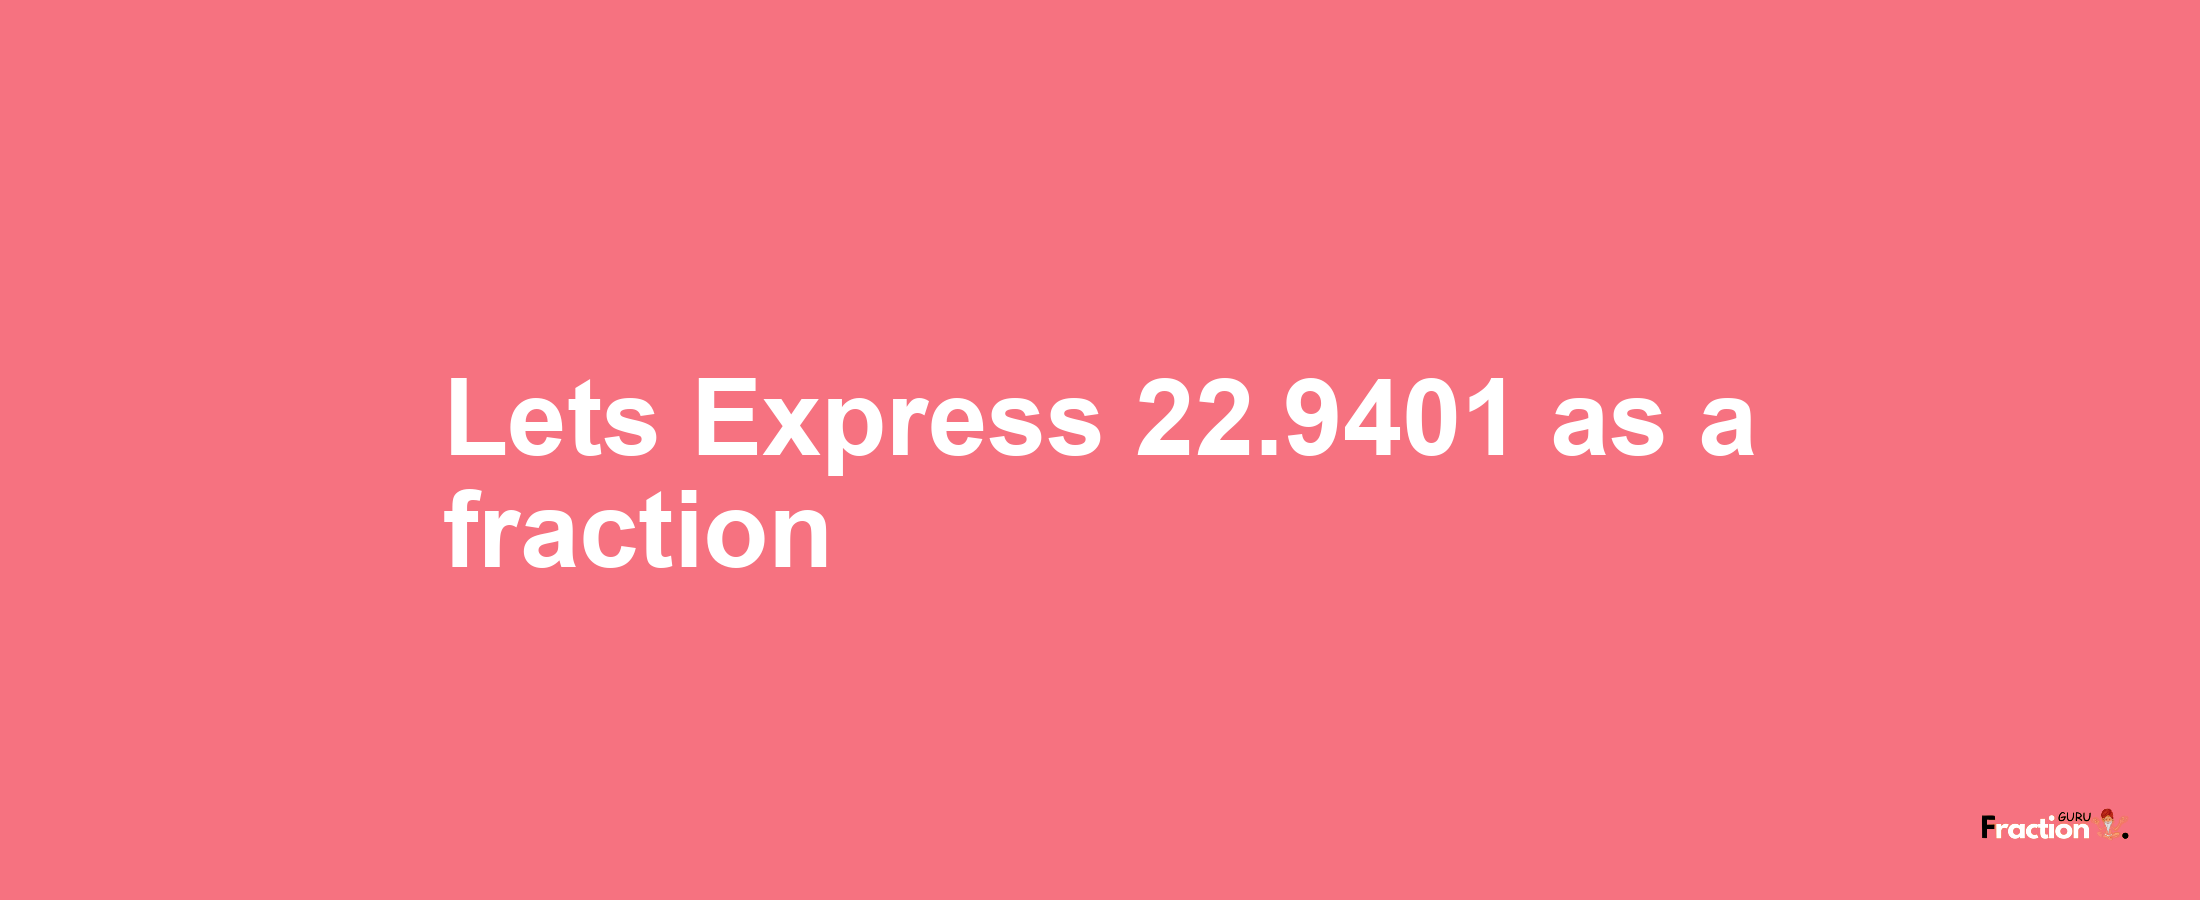 Lets Express 22.9401 as afraction